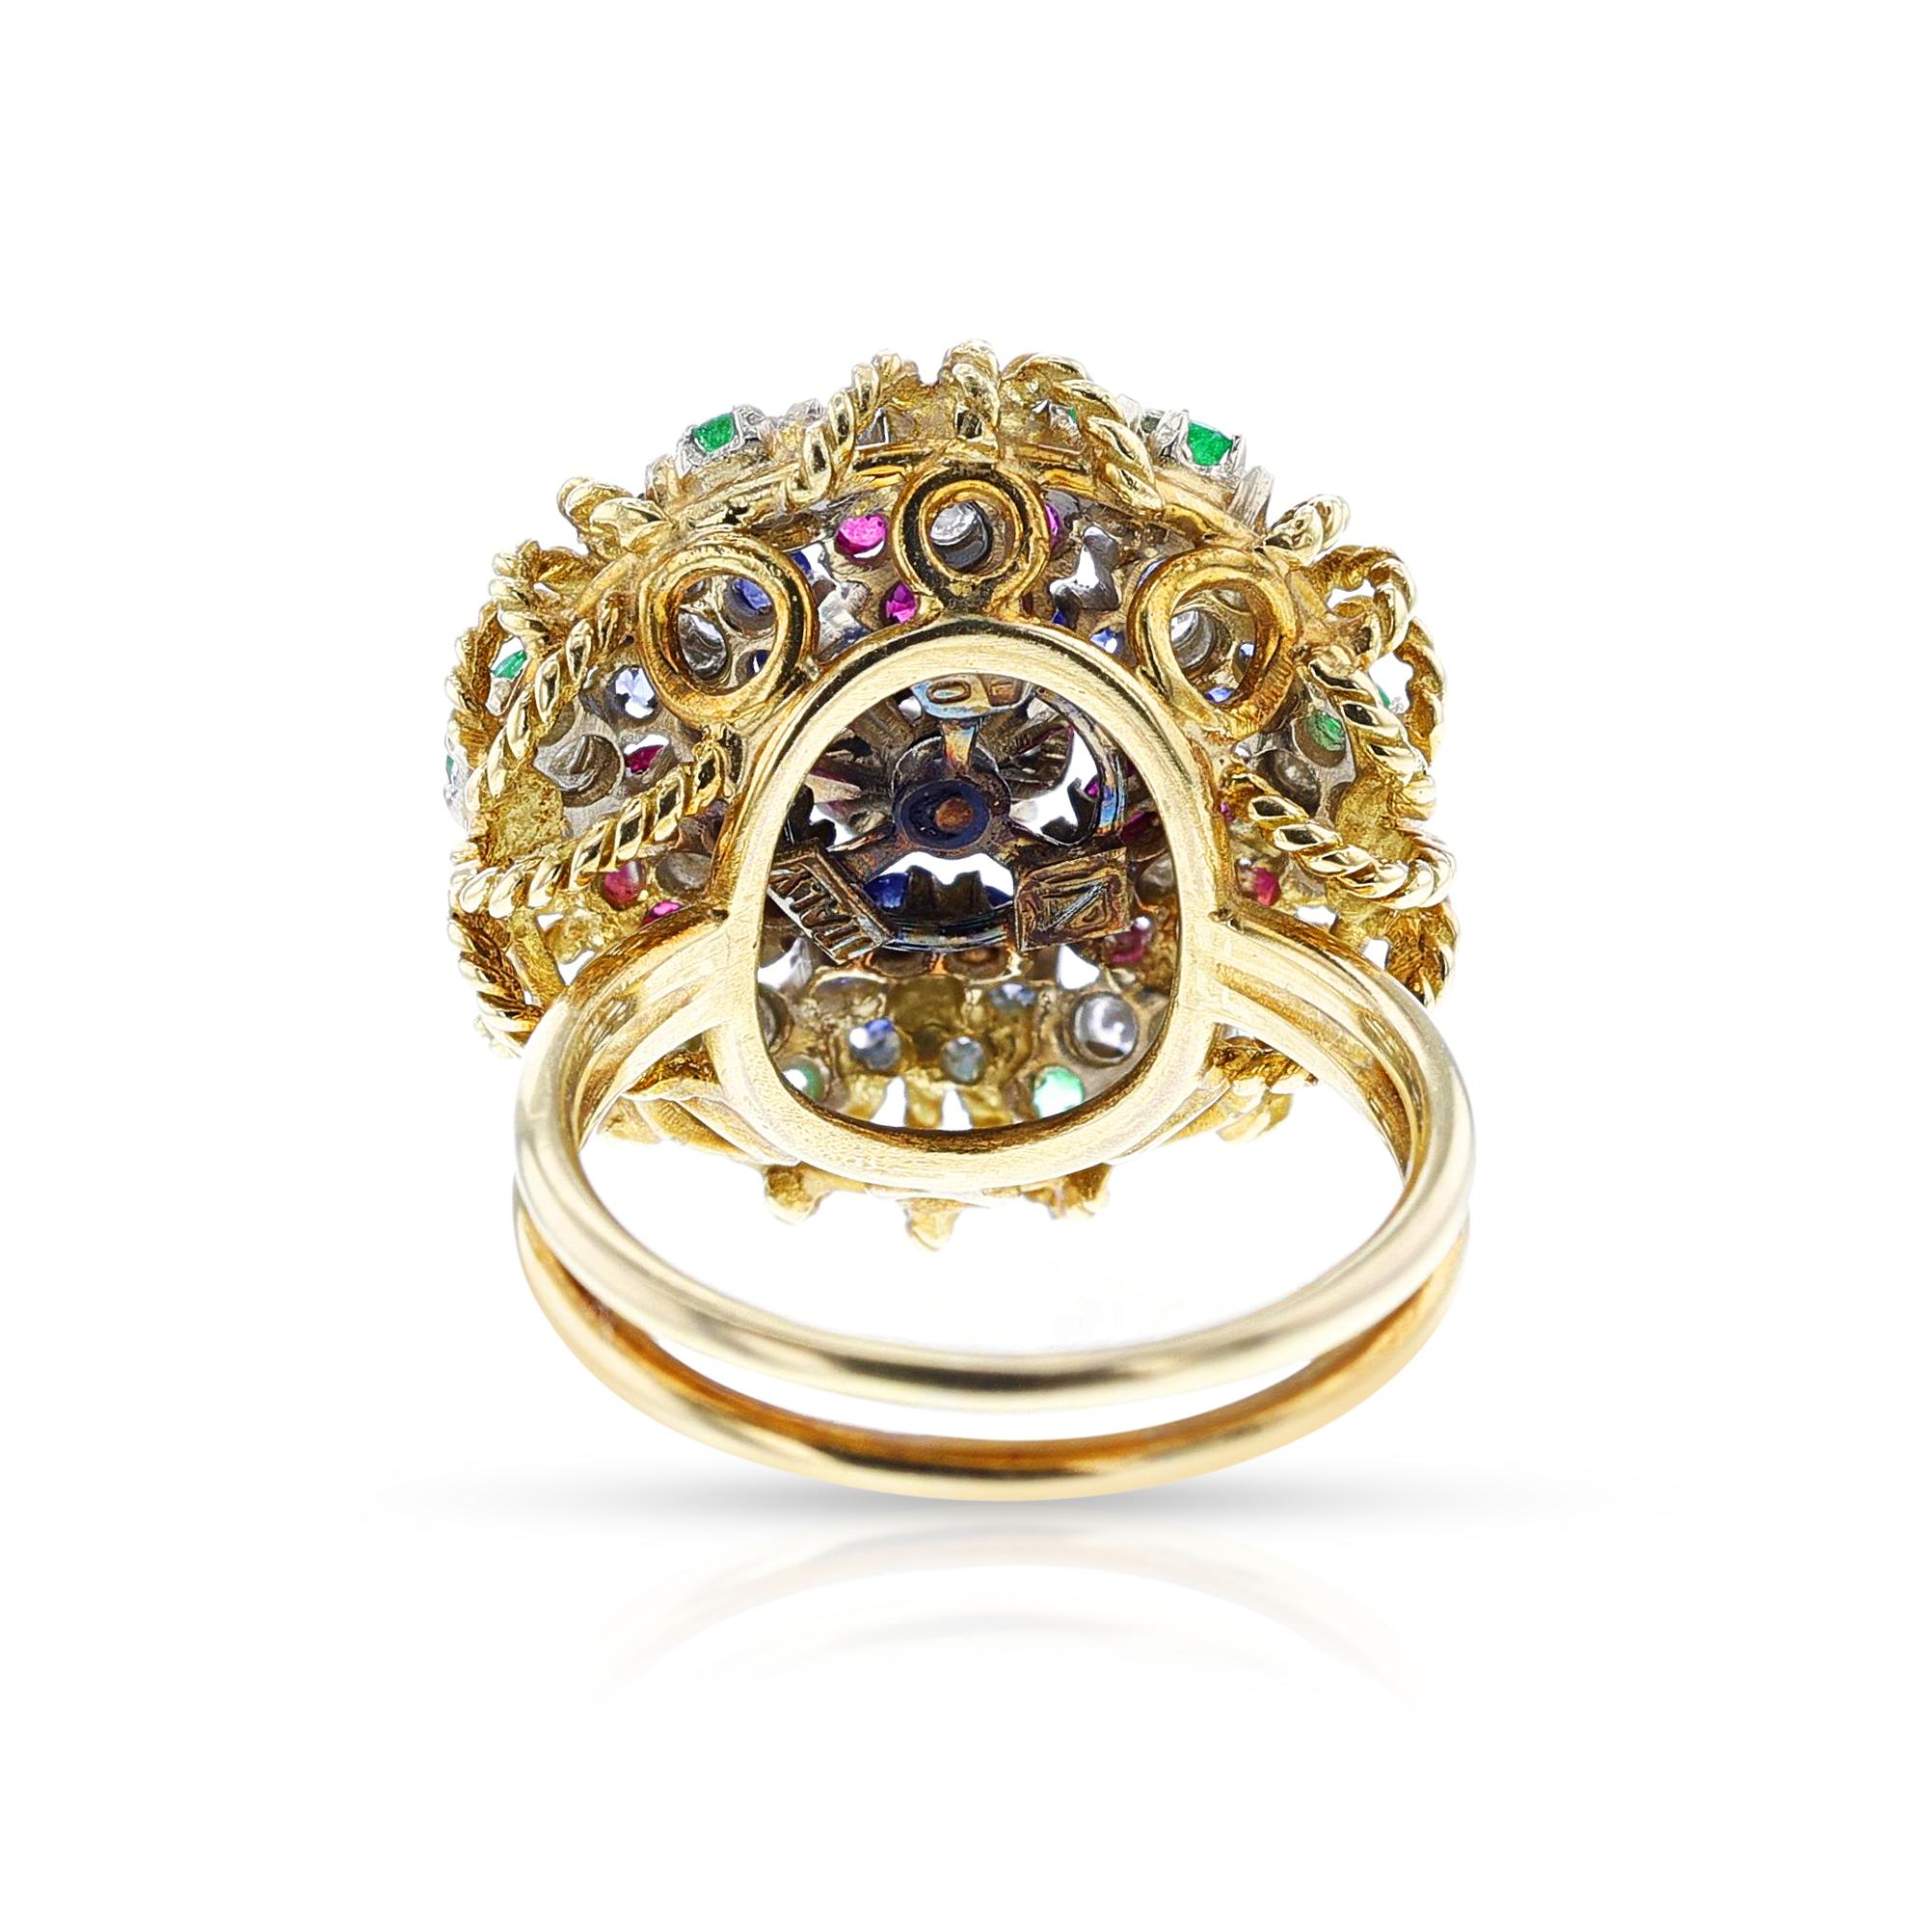 Ruby, Emerald, Sapphire and Diamond Floral Ring, 18k In Excellent Condition For Sale In New York, NY